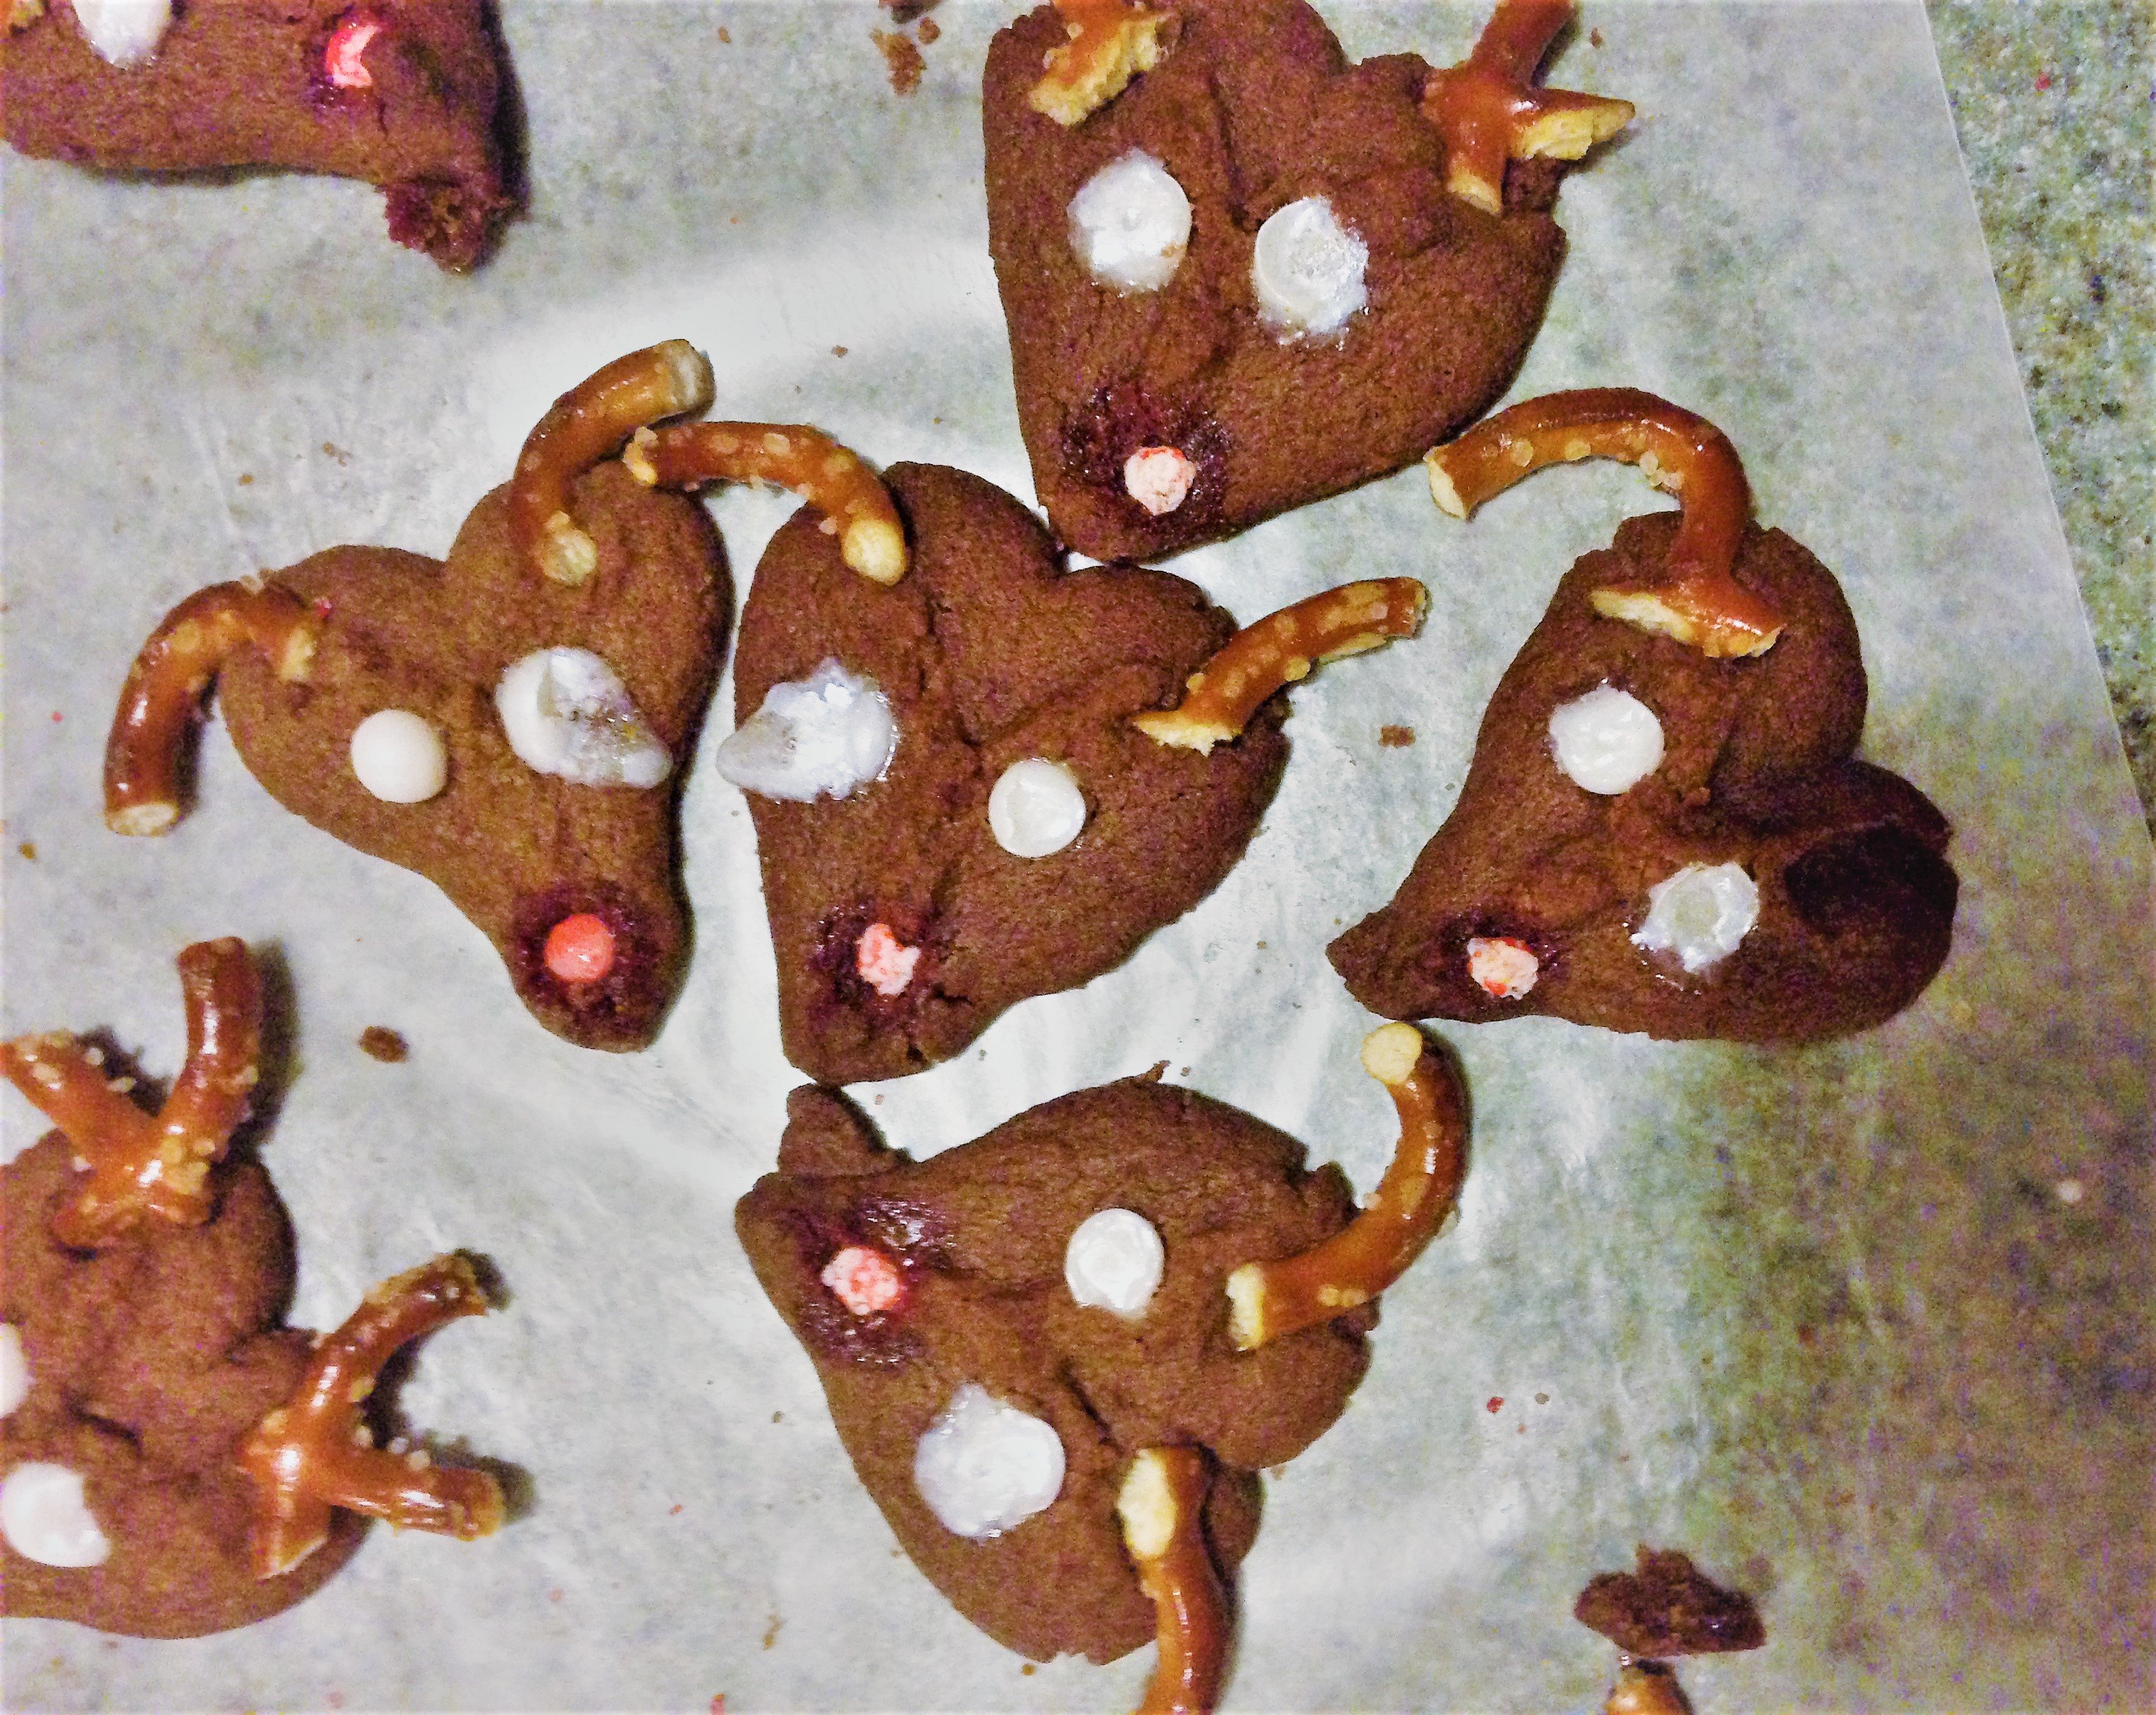 Reindeer Spritz Cookie Recipe - These cute Rudolph cookies will bring a smile to young and old at your next holiday gathering! Reindeer Spritz Cookies are made using a cookie press. Spritz is traditionally a German butter cookie or biscuit formed by squirting the dough through a shaped disc with a cookie press. Kids absolutely love to use a cookie press. 